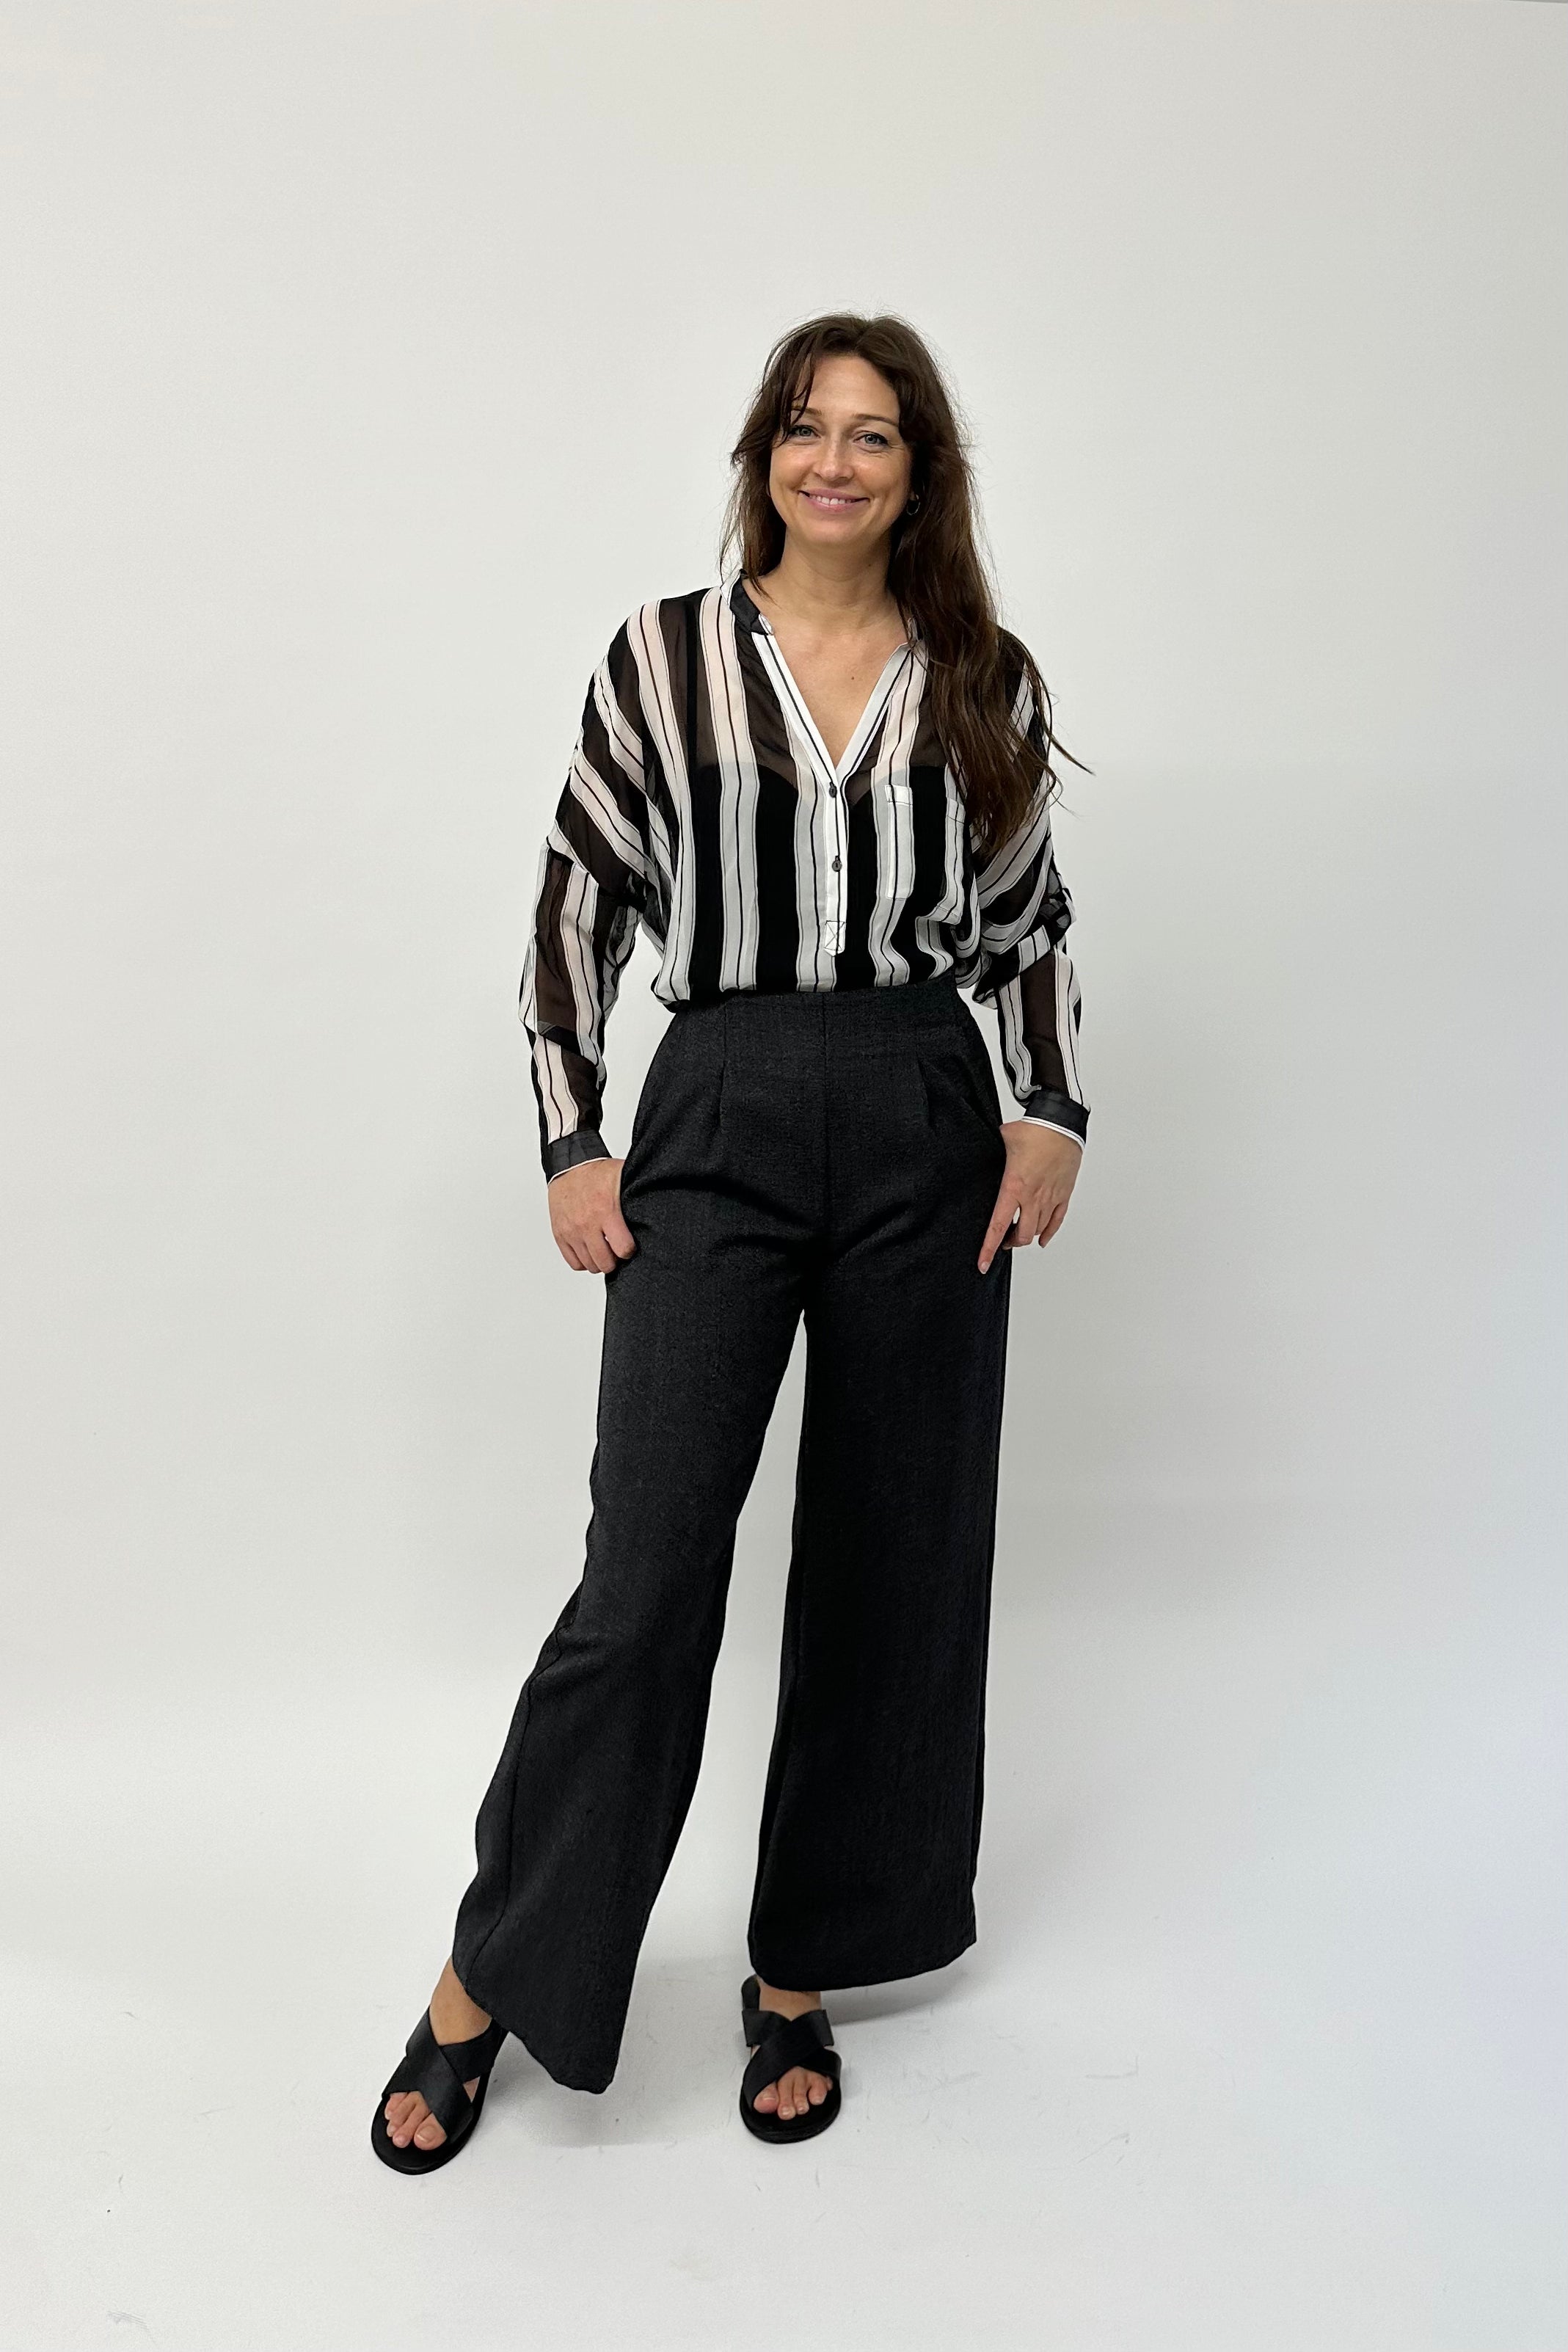 High waisted wool pant with pockets. Australian made